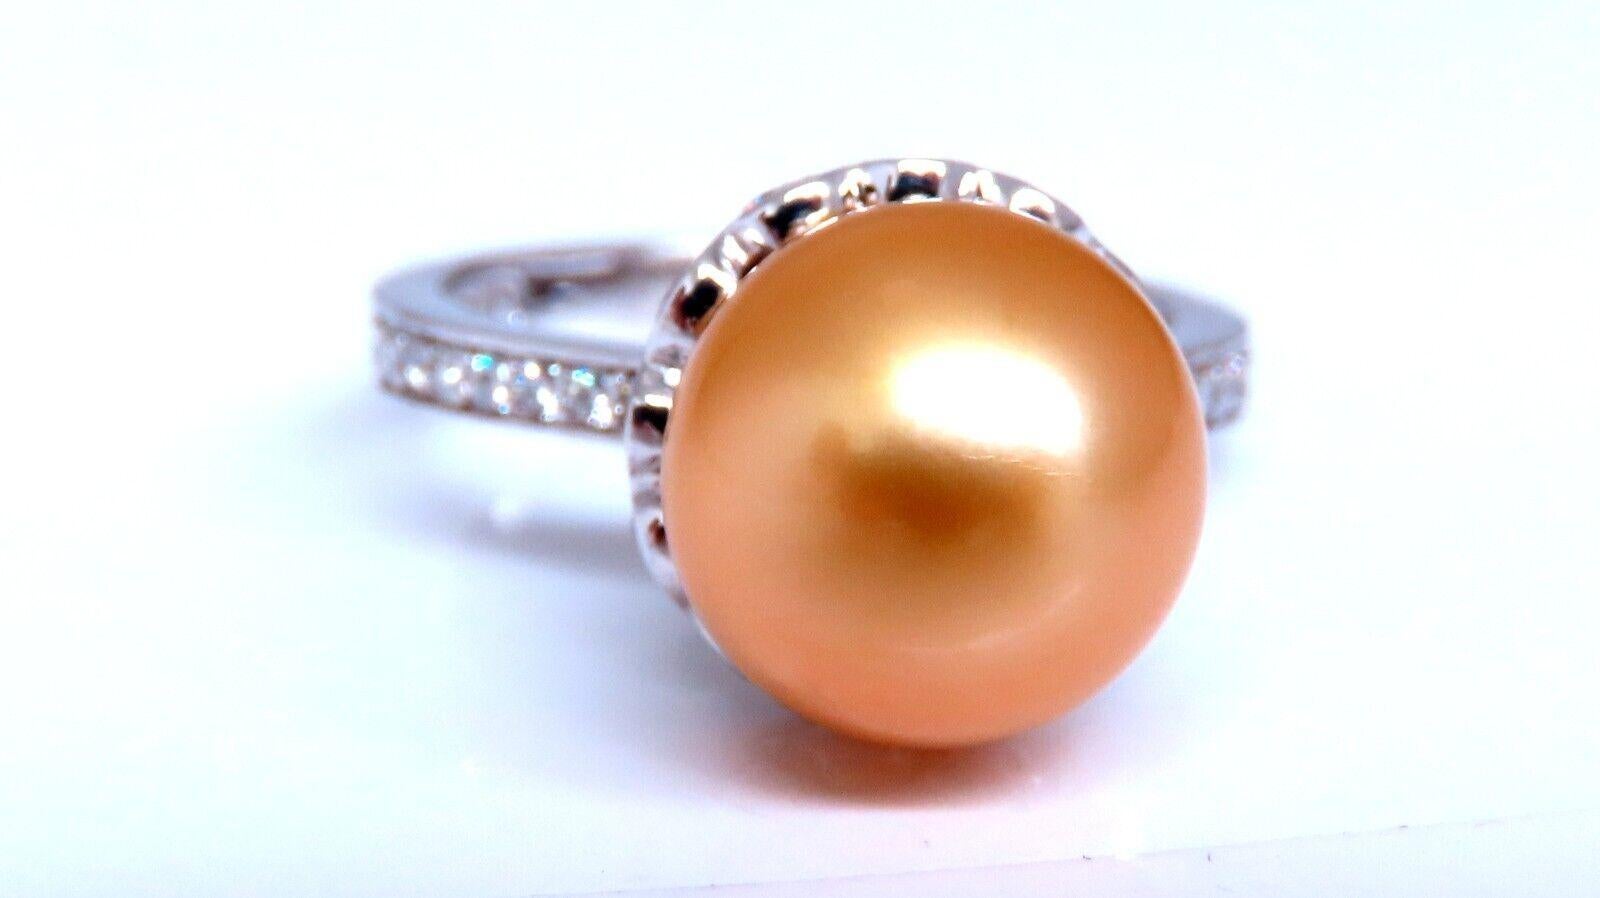 10.3mm Natural South Seas Gold / Yellow Pearl Ring

.70ct Natural Round Diamonds

14kt. white gold

4.3 grams.

Current ring size: 5.5

We may resize.

Depth of ring: 14mm

$6000 Certificate of Appraisal to Accompany